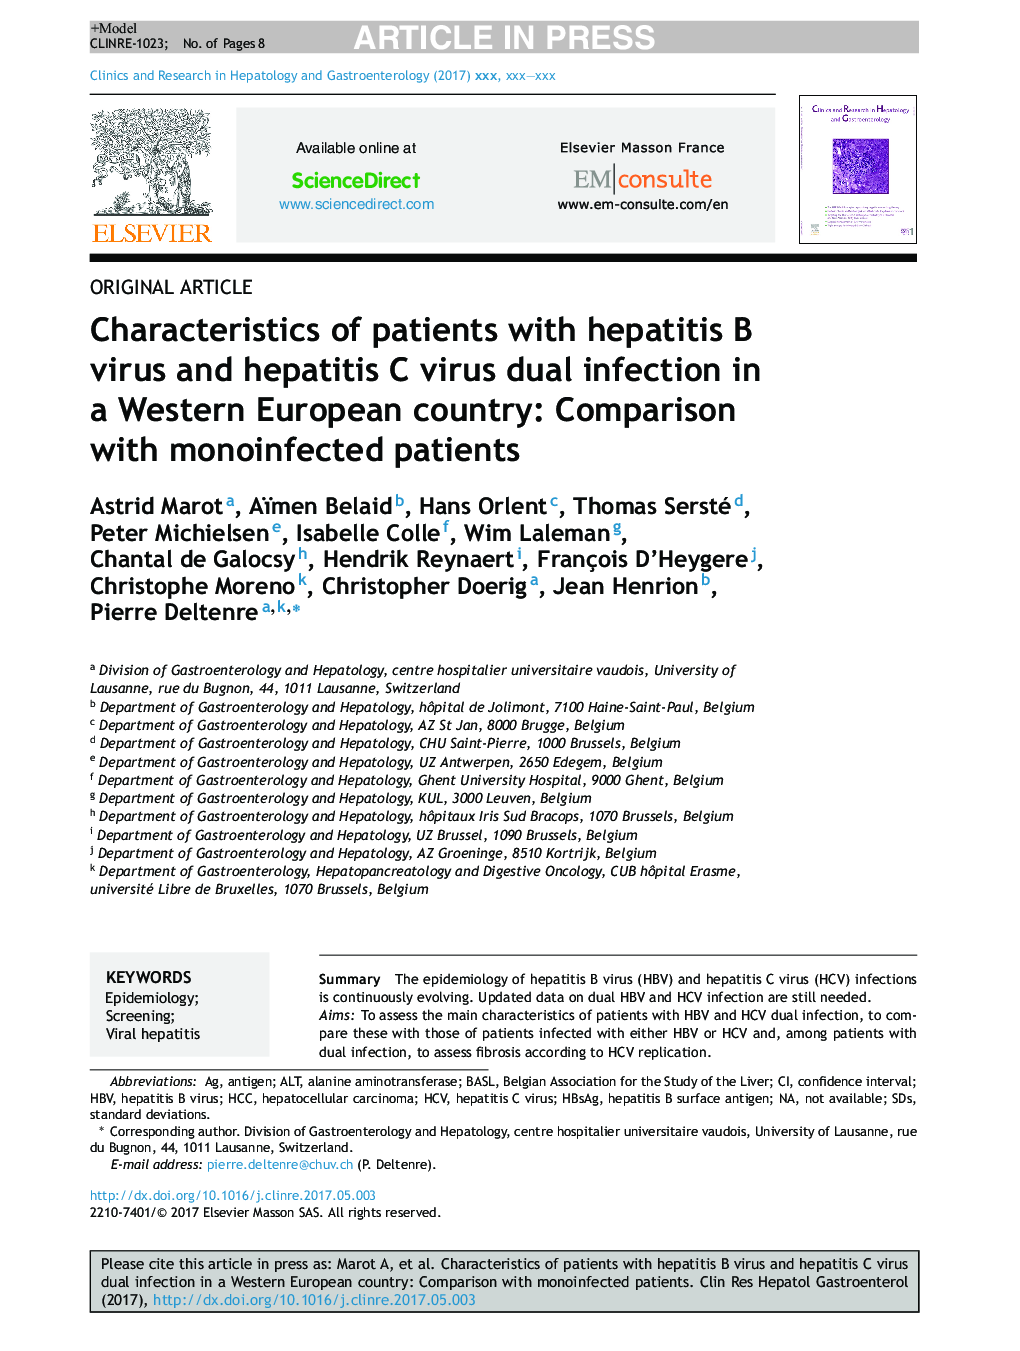 Characteristics of patients with hepatitis B virus and hepatitis C virus dual infection in a Western European country: Comparison with monoinfected patients